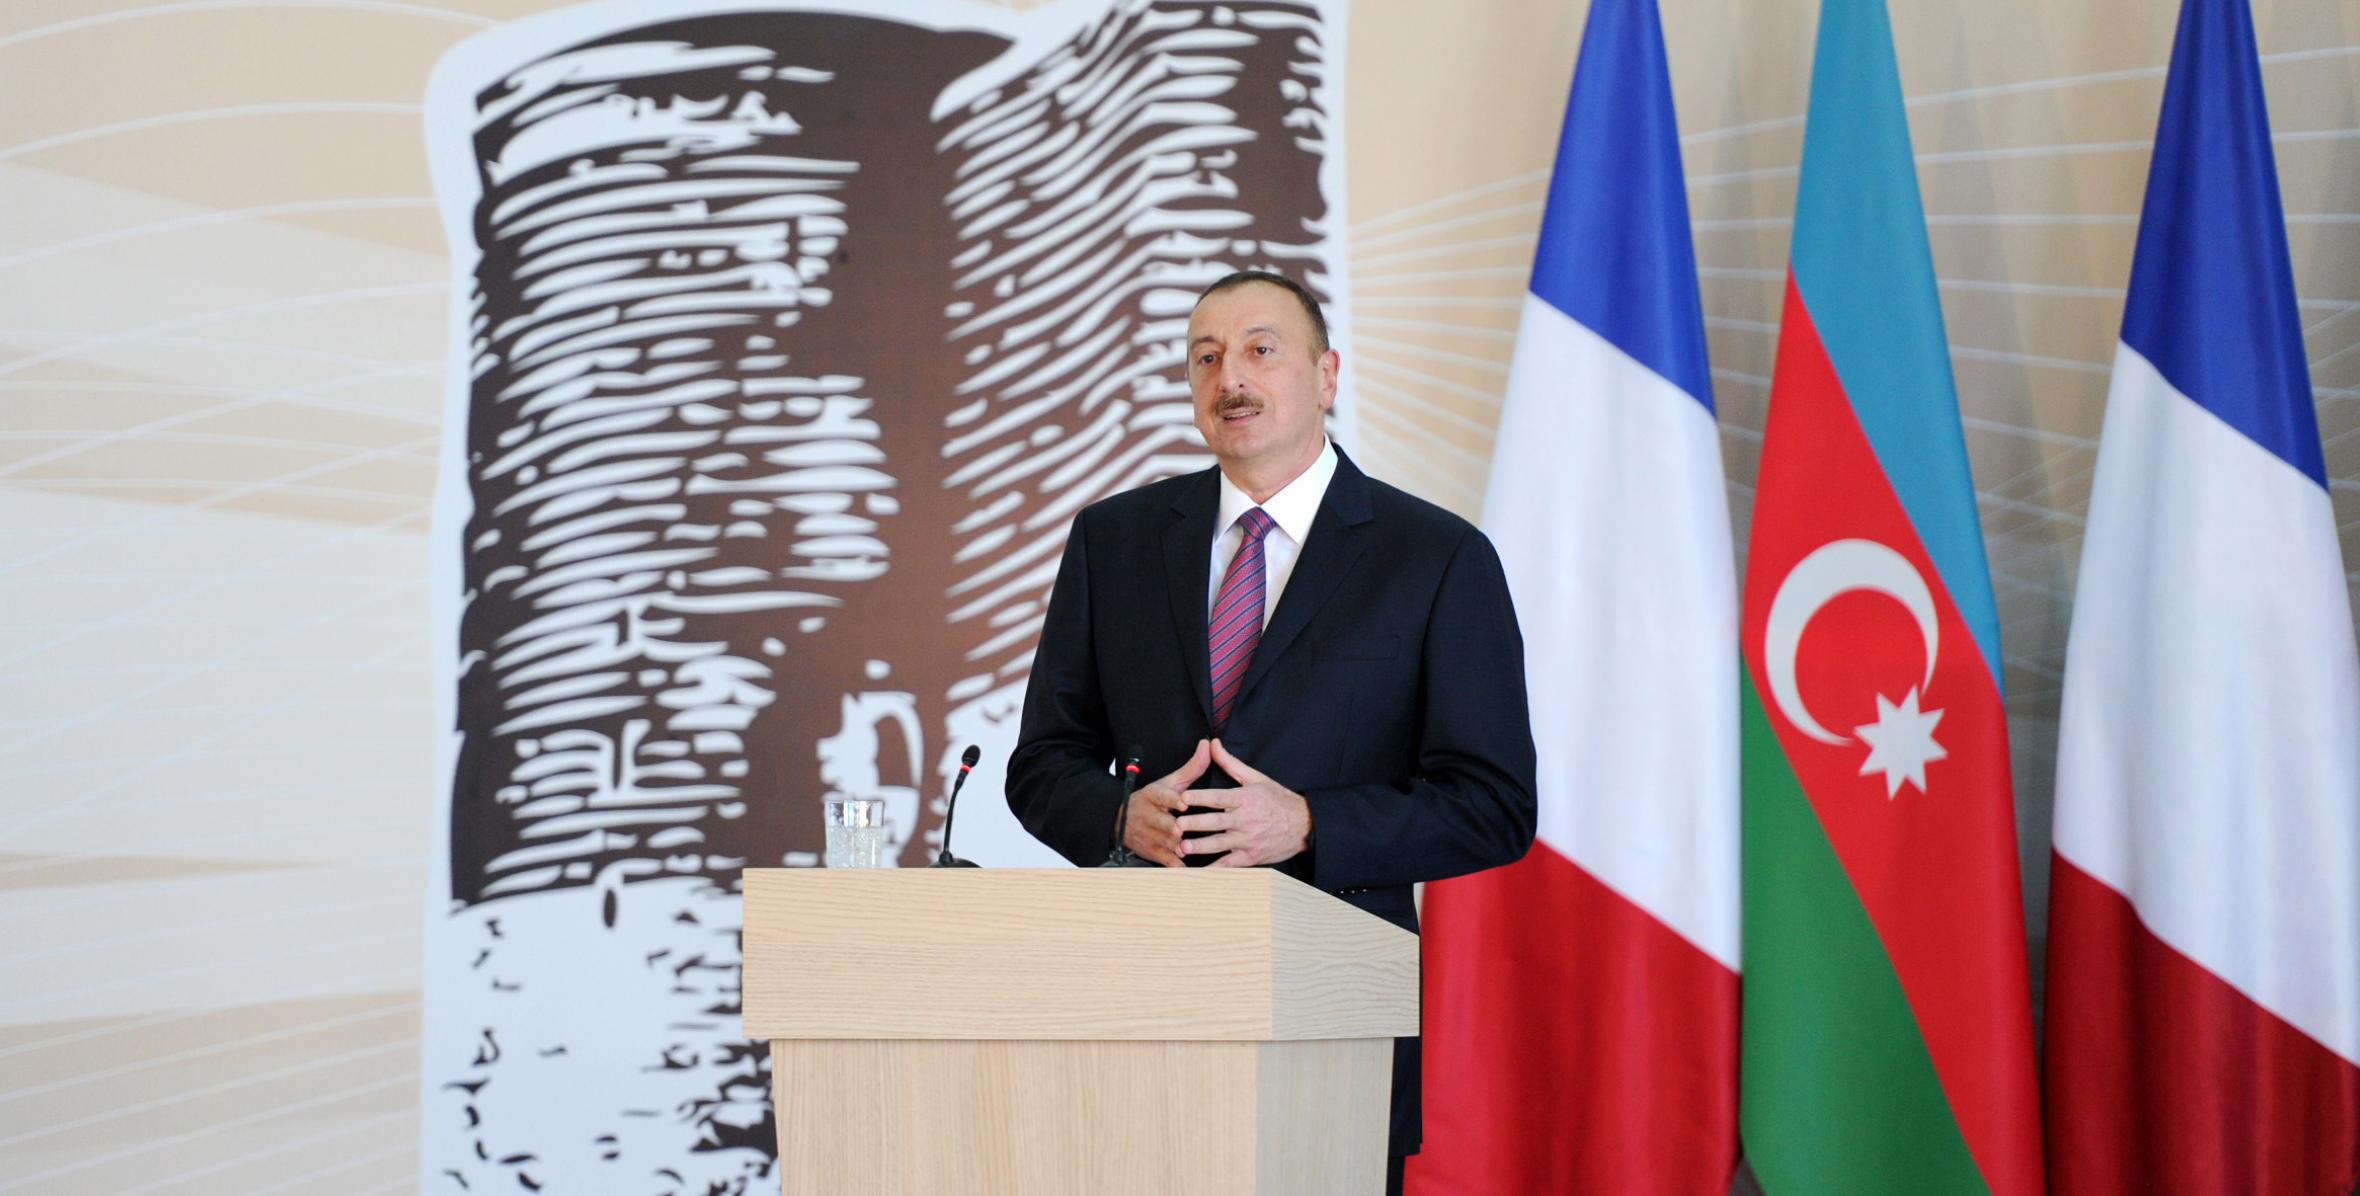 Speech by Ilham Aliyev at the ceremony of reviewing the French Lyceum of Baku